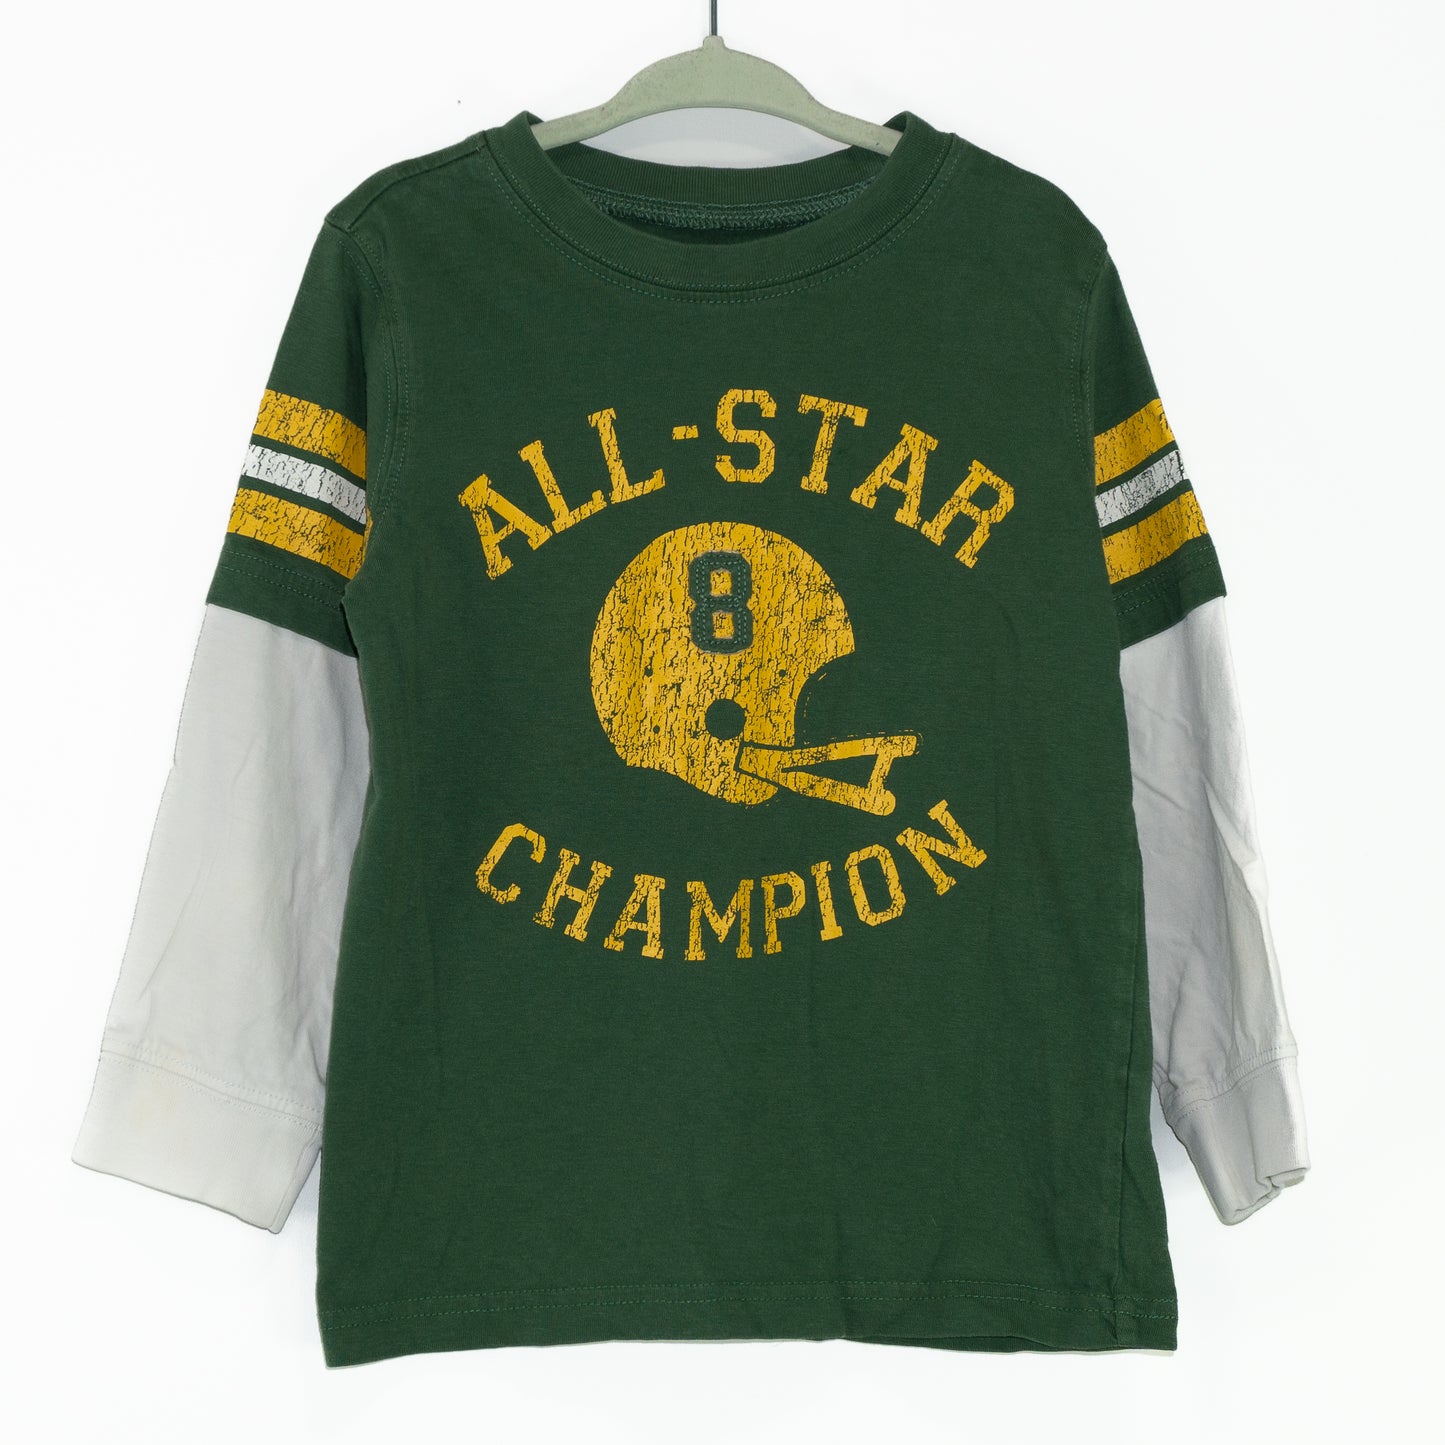 All-Star Champion Long-sleeve Tee Size 4T